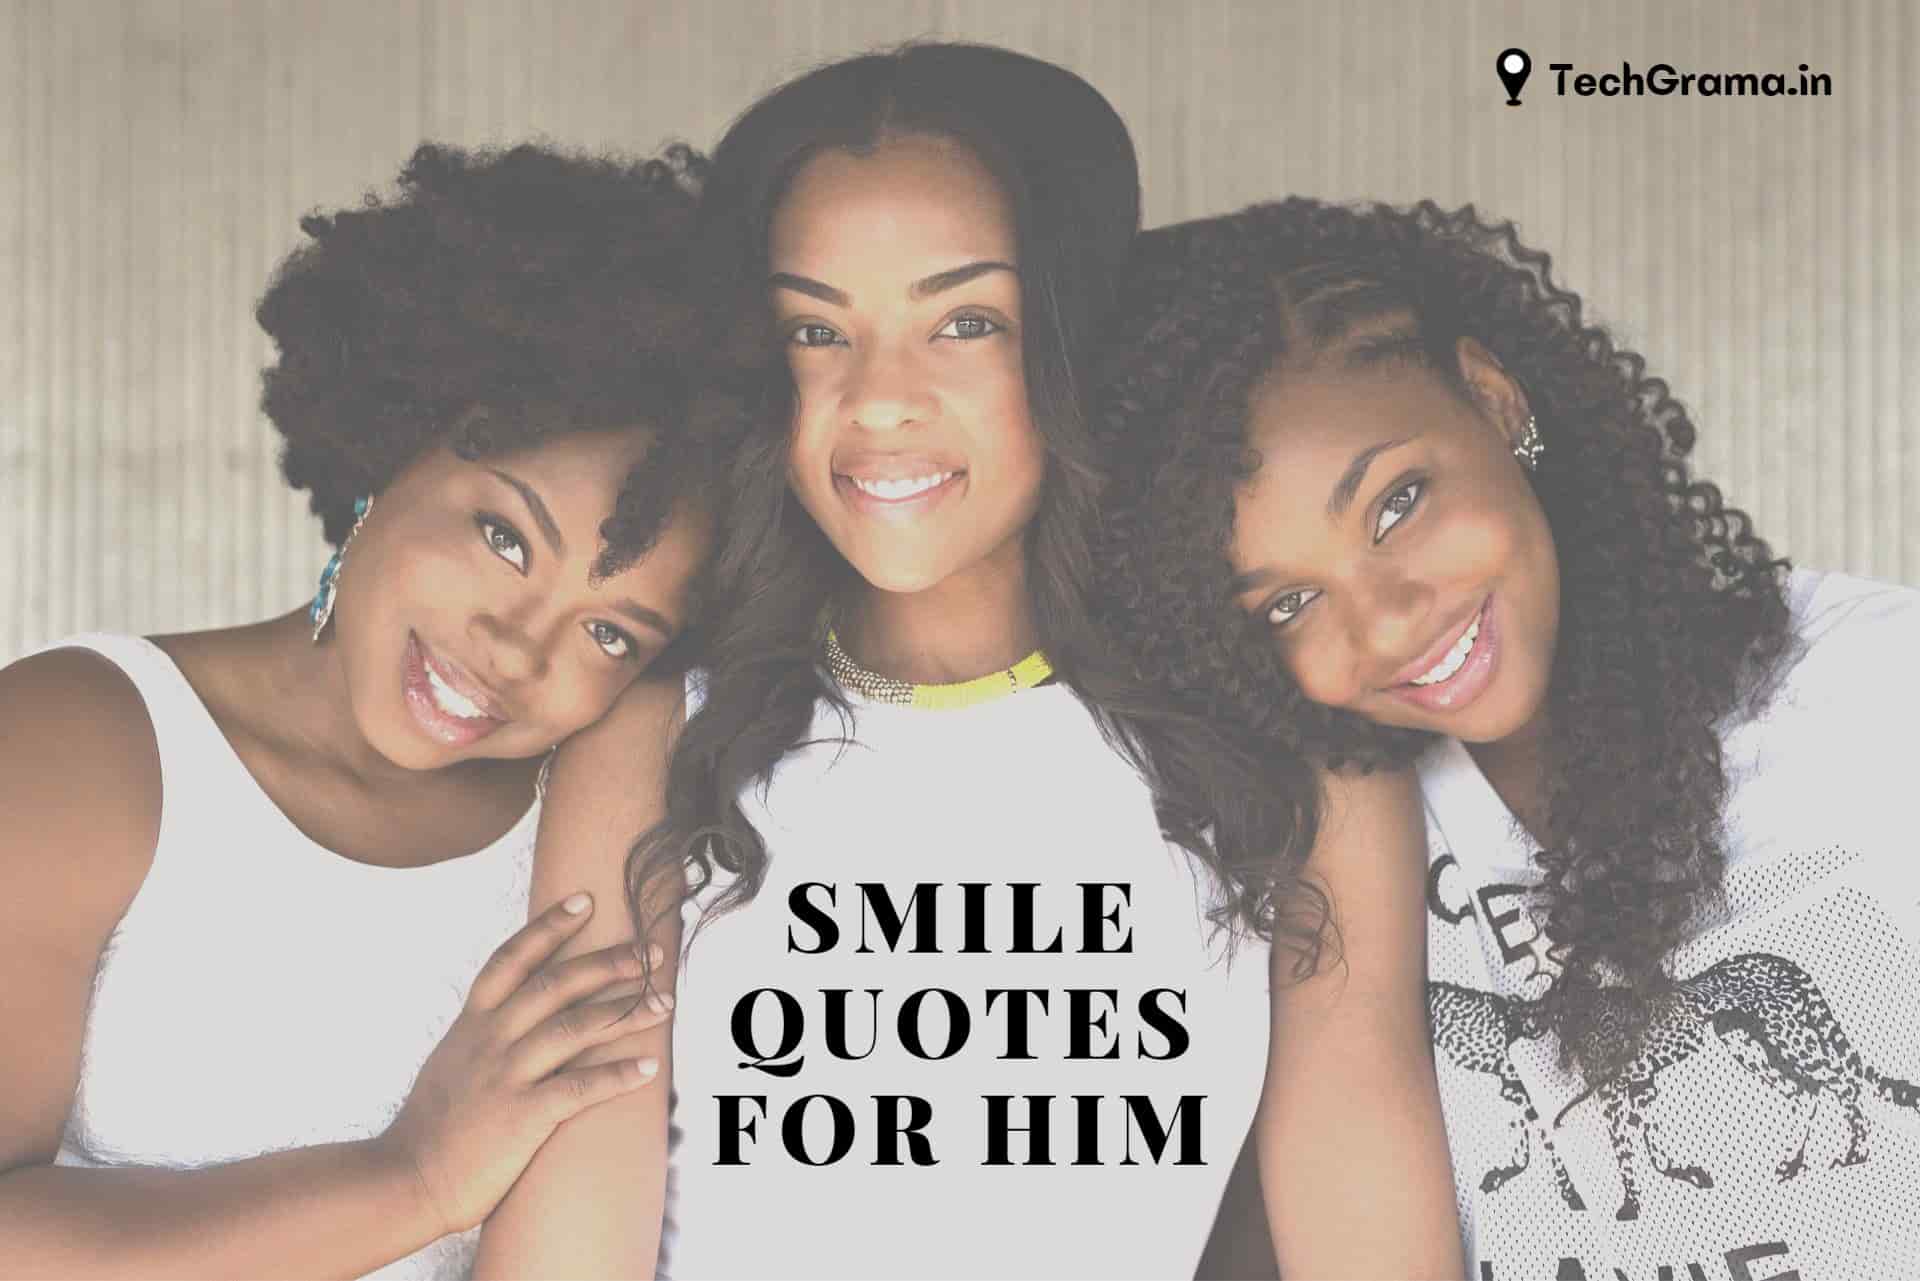 Best Cute Smile Quotes For Him, Love Smile Quotes For Him, Beautiful Smile Quotes For Him, Affection Quotes For Him, Your Smile Quotes For Him, Smile Quotes For Him, Quotes to Make Him Smile, Funny Quotes to Make Him Smile, Crush Smile Quotes For Him, You Make Me Smile Quotes For Him.